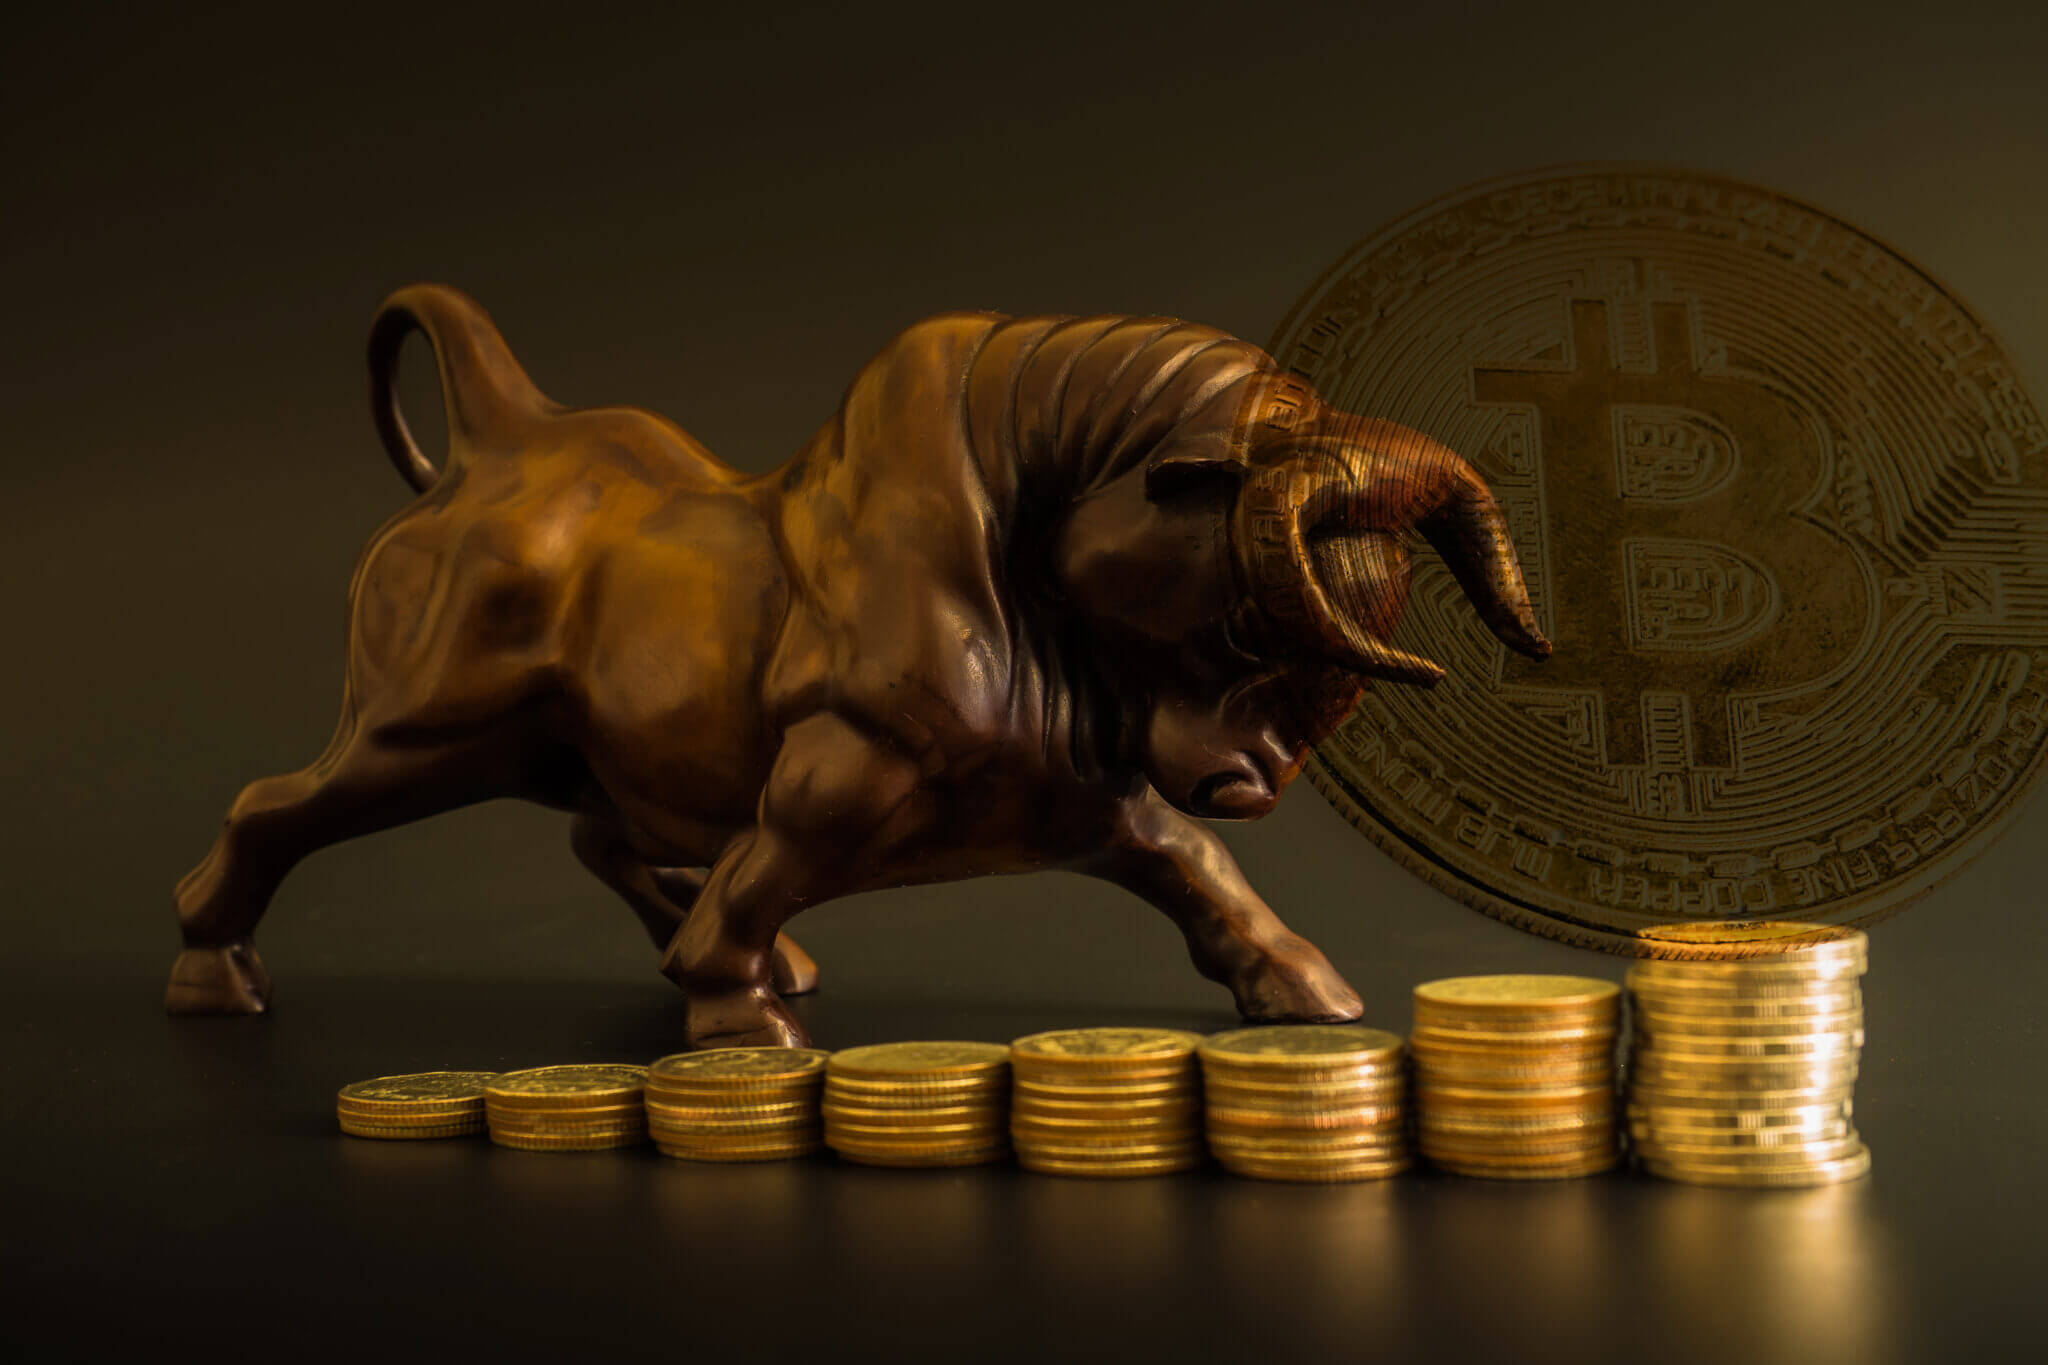 Bull standing next to coins